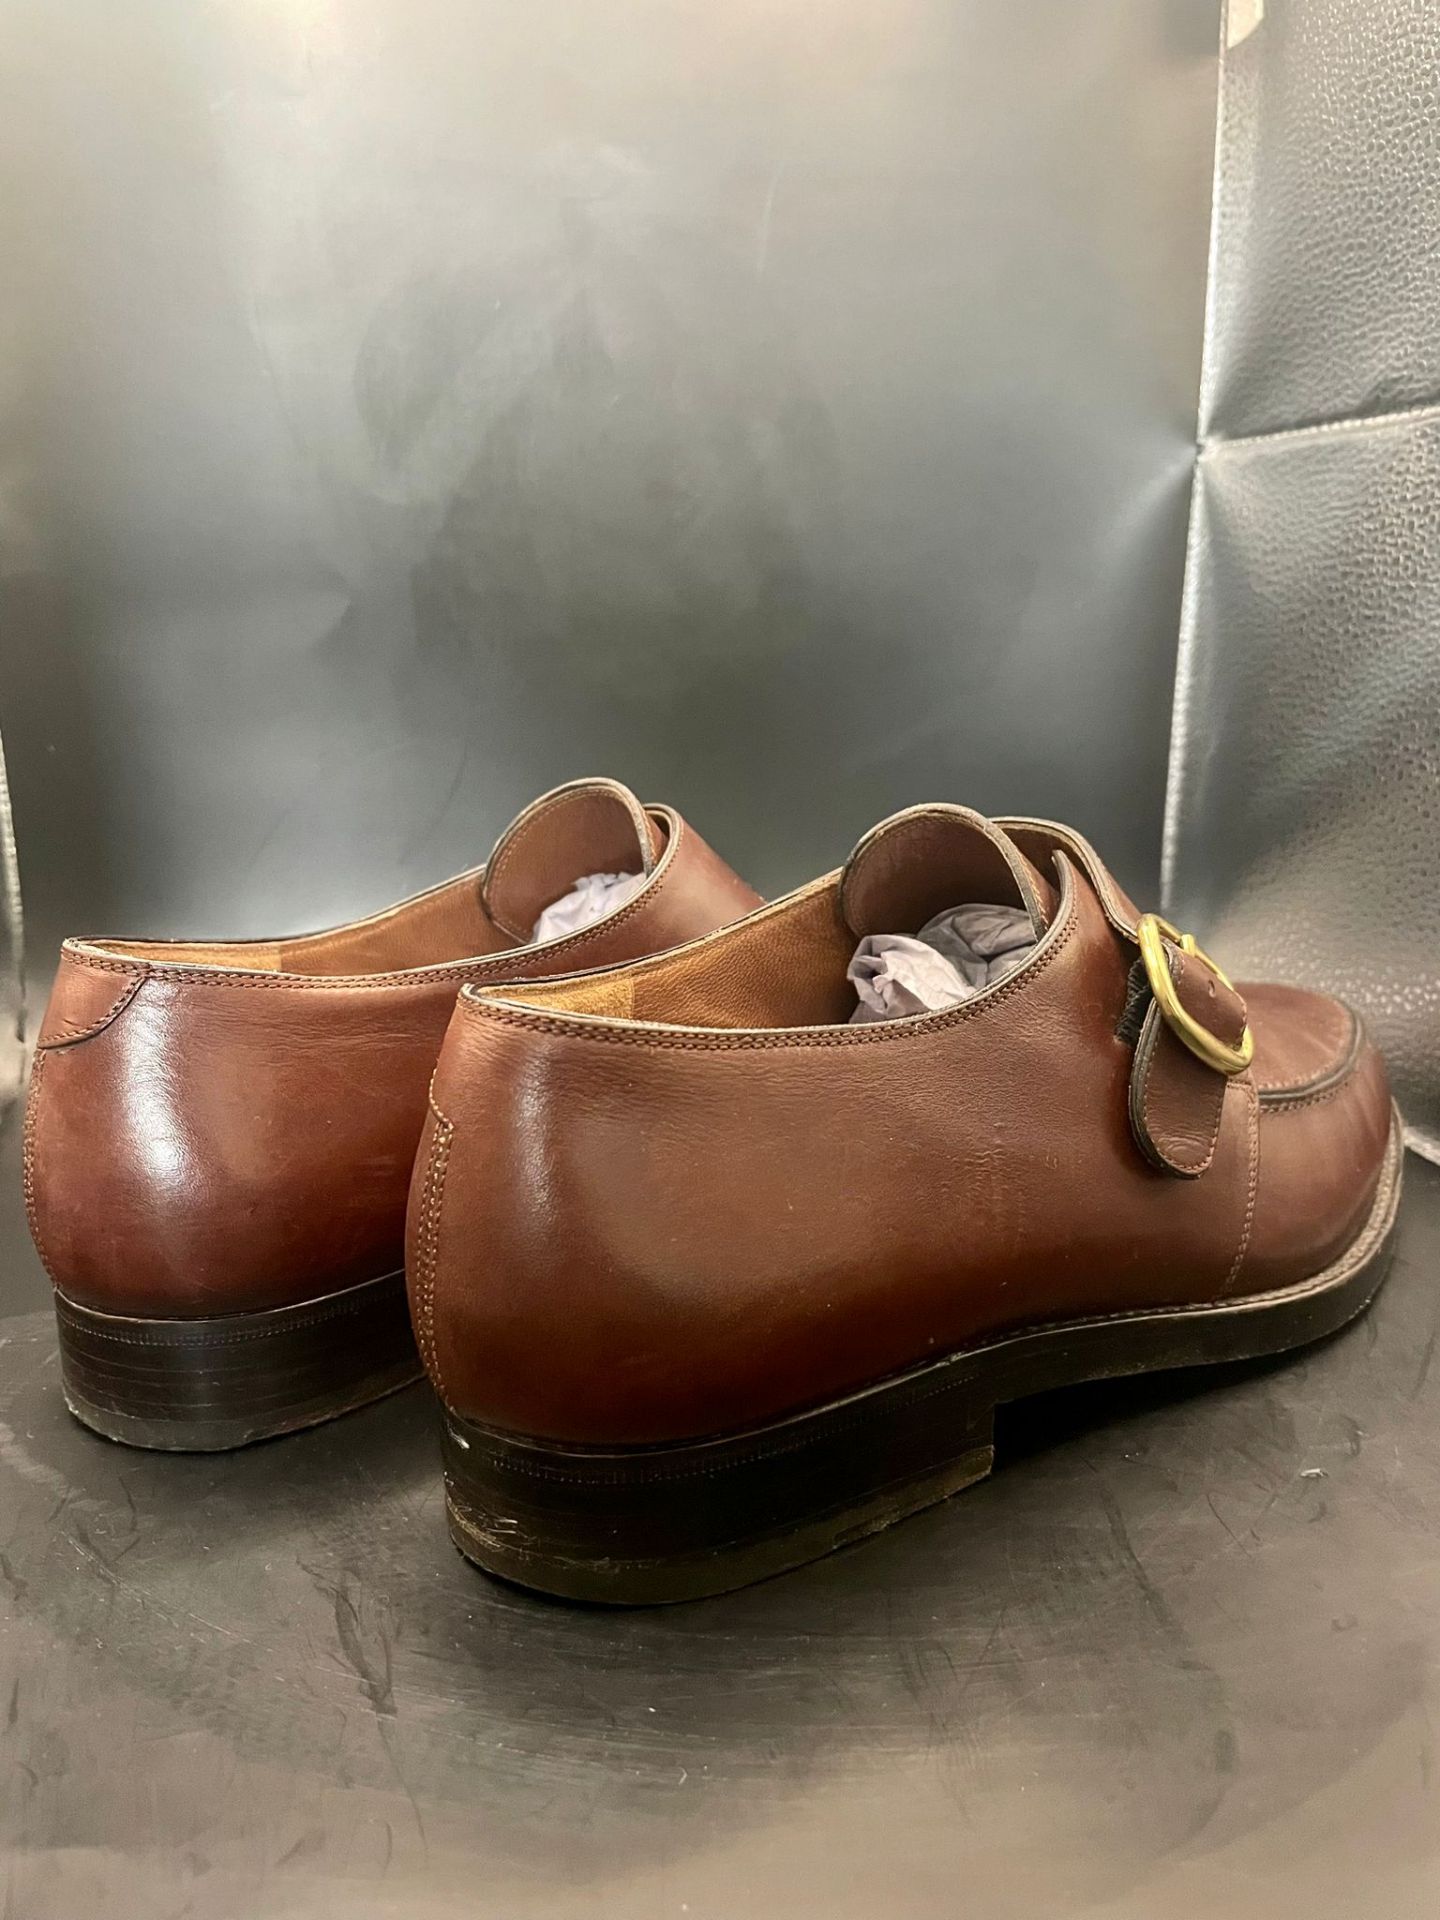 Fratelli Rossetti Monk Strap leather shoes size 7 with good soles. Good condition please see photos  - Image 3 of 14